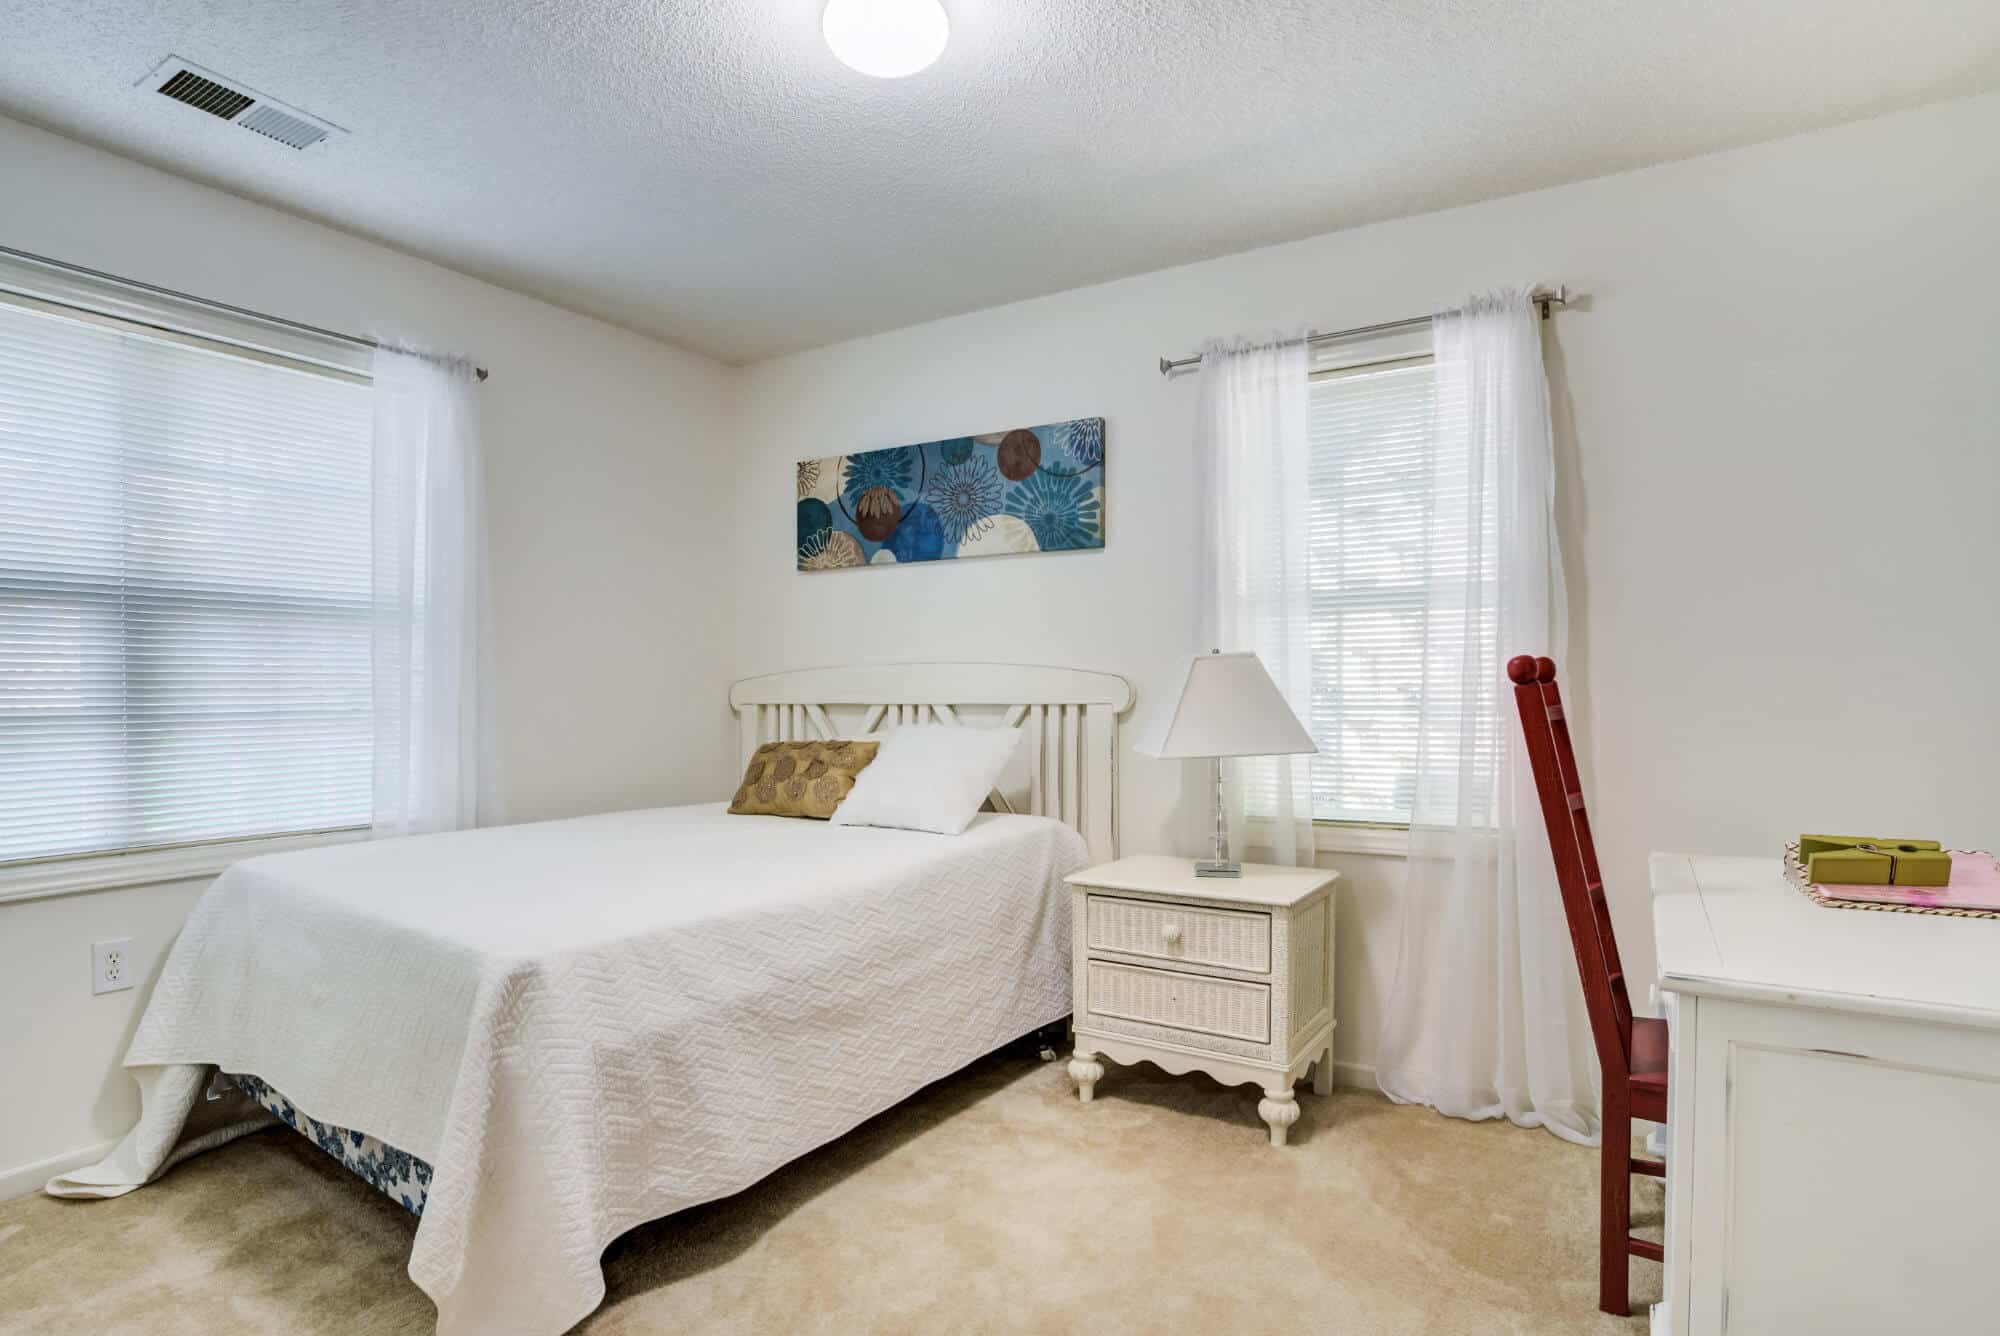 raleigh off campus university woods apartments off campus apartments near nc state university spacious private bedroom